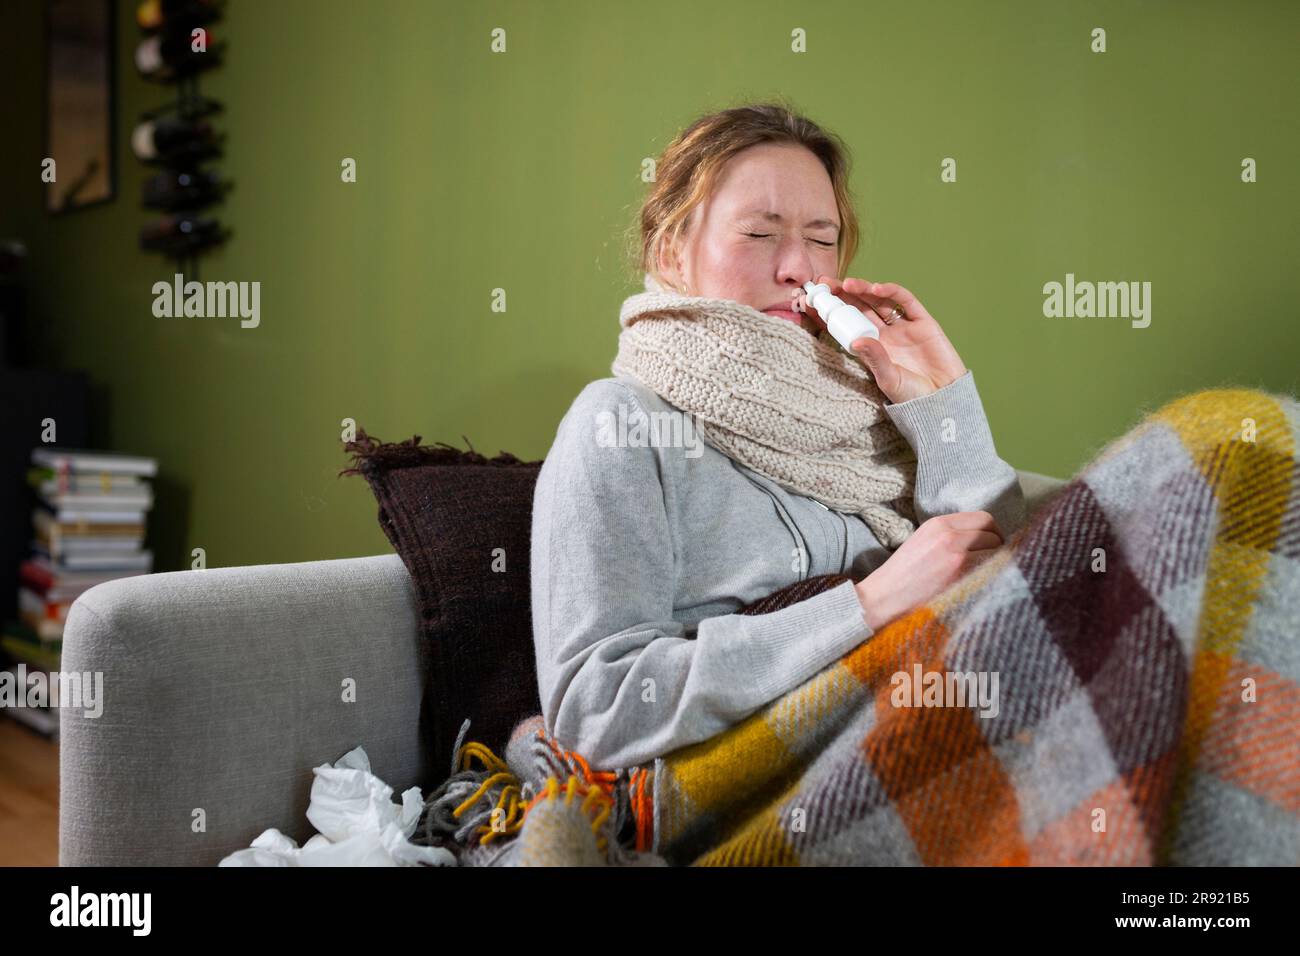 Sick young woman using nasal spray relaxing on couch Stock Photo